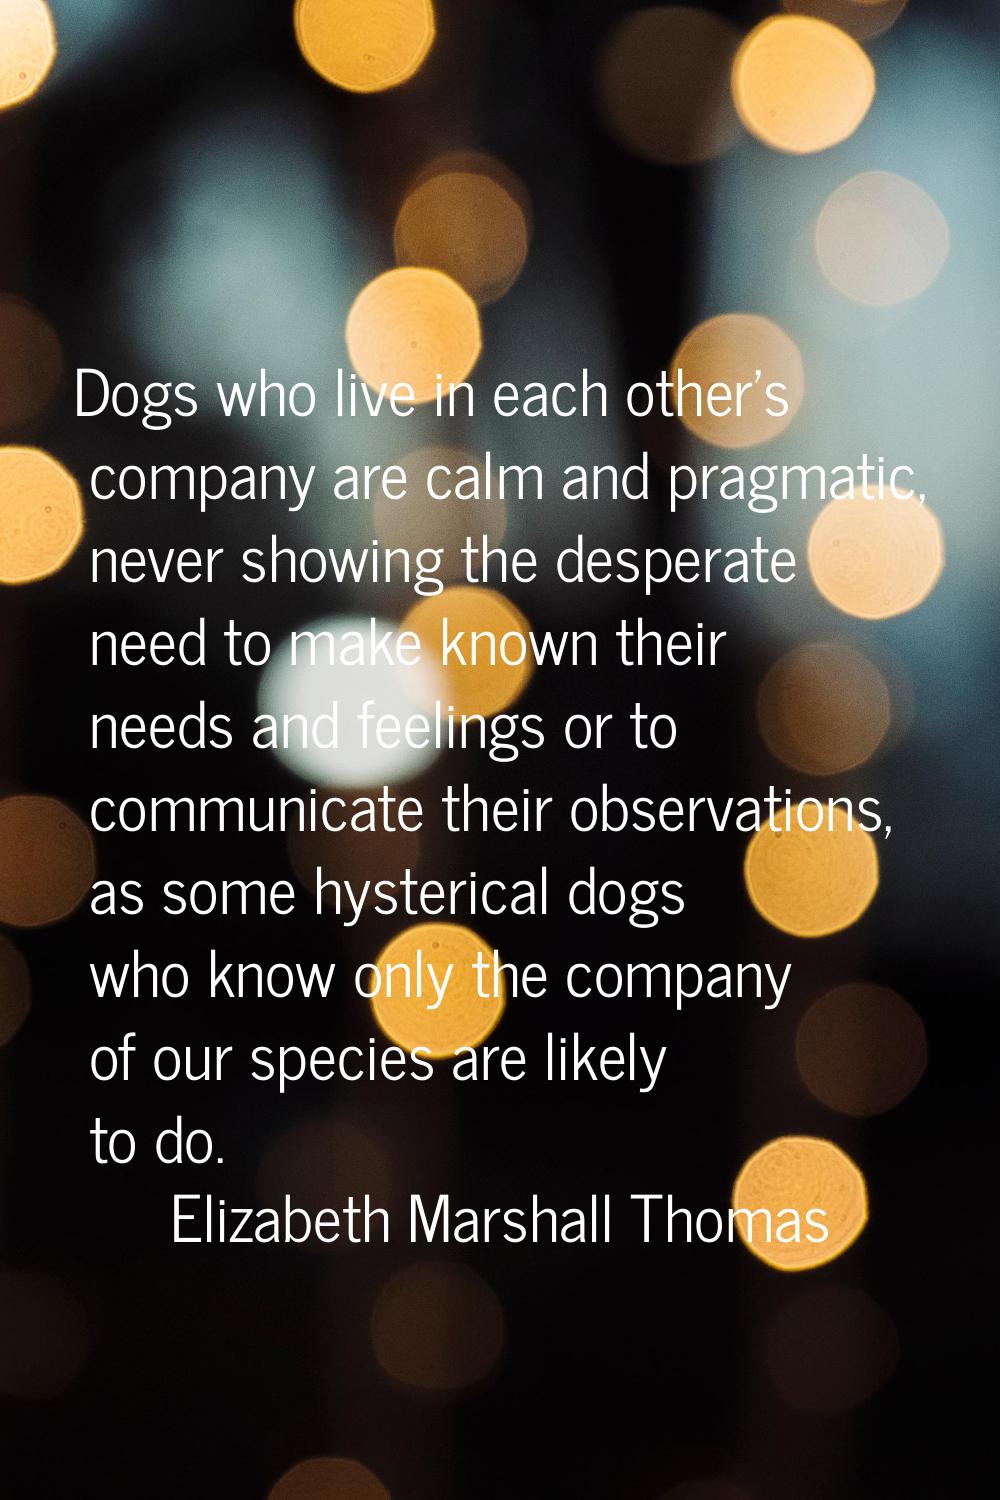 Dogs who live in each other's company are calm and pragmatic, never showing the desperate need to m